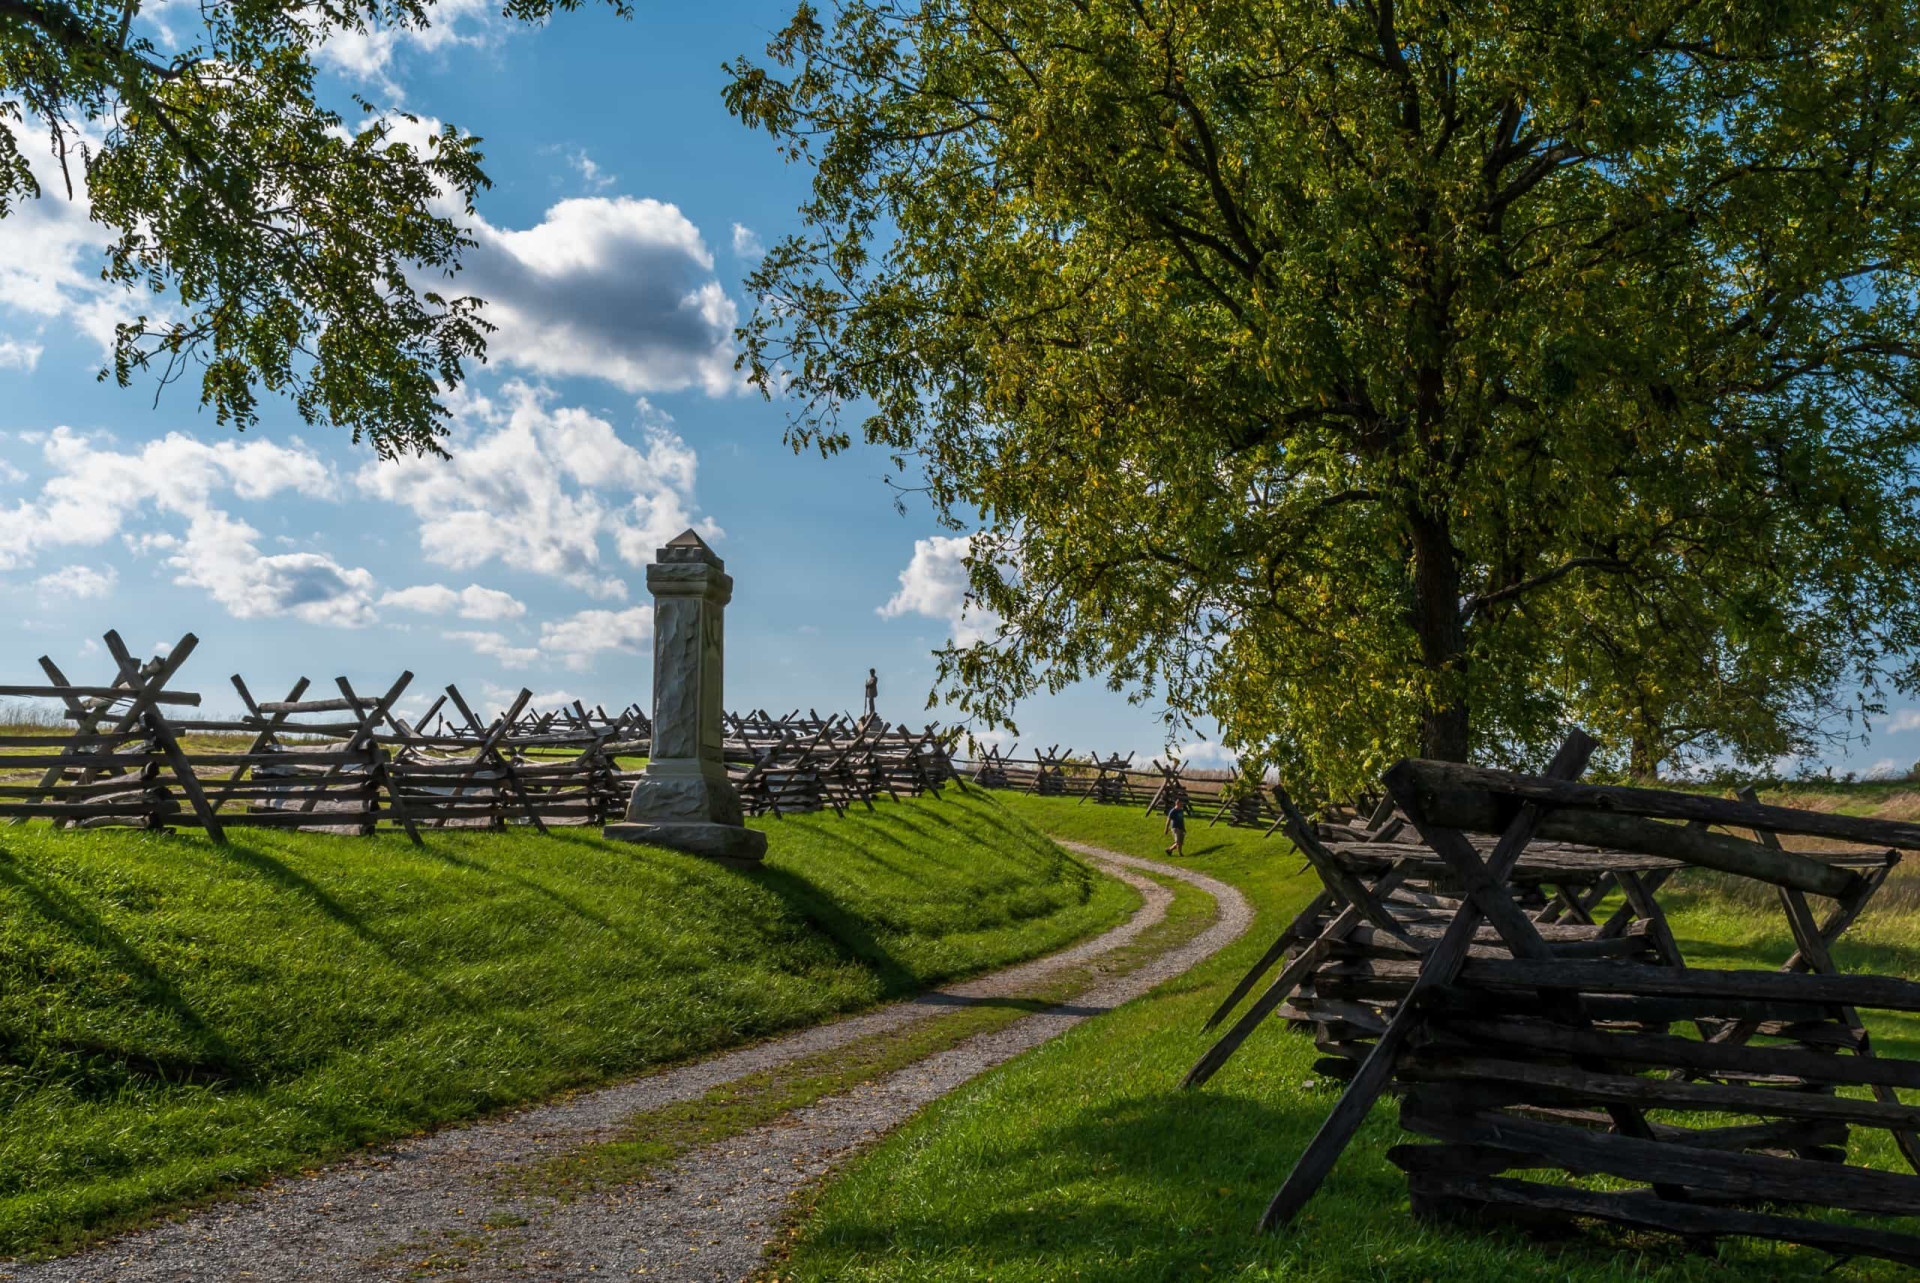 <p>The 1862 Battle of Antietam took place on a creek near Sharpsburg, Maryland. Over 23,000 men were killed or wounded. The road where the numerous bodies are laid is today known as Bloody Lane, and it's the state's most haunted location.</p><p>You may also like:<a href="https://www.starsinsider.com/n/416516?utm_source=msn.com&utm_medium=display&utm_campaign=referral_description&utm_content=505450en-ae"> The best fish dishes from around the world</a></p>